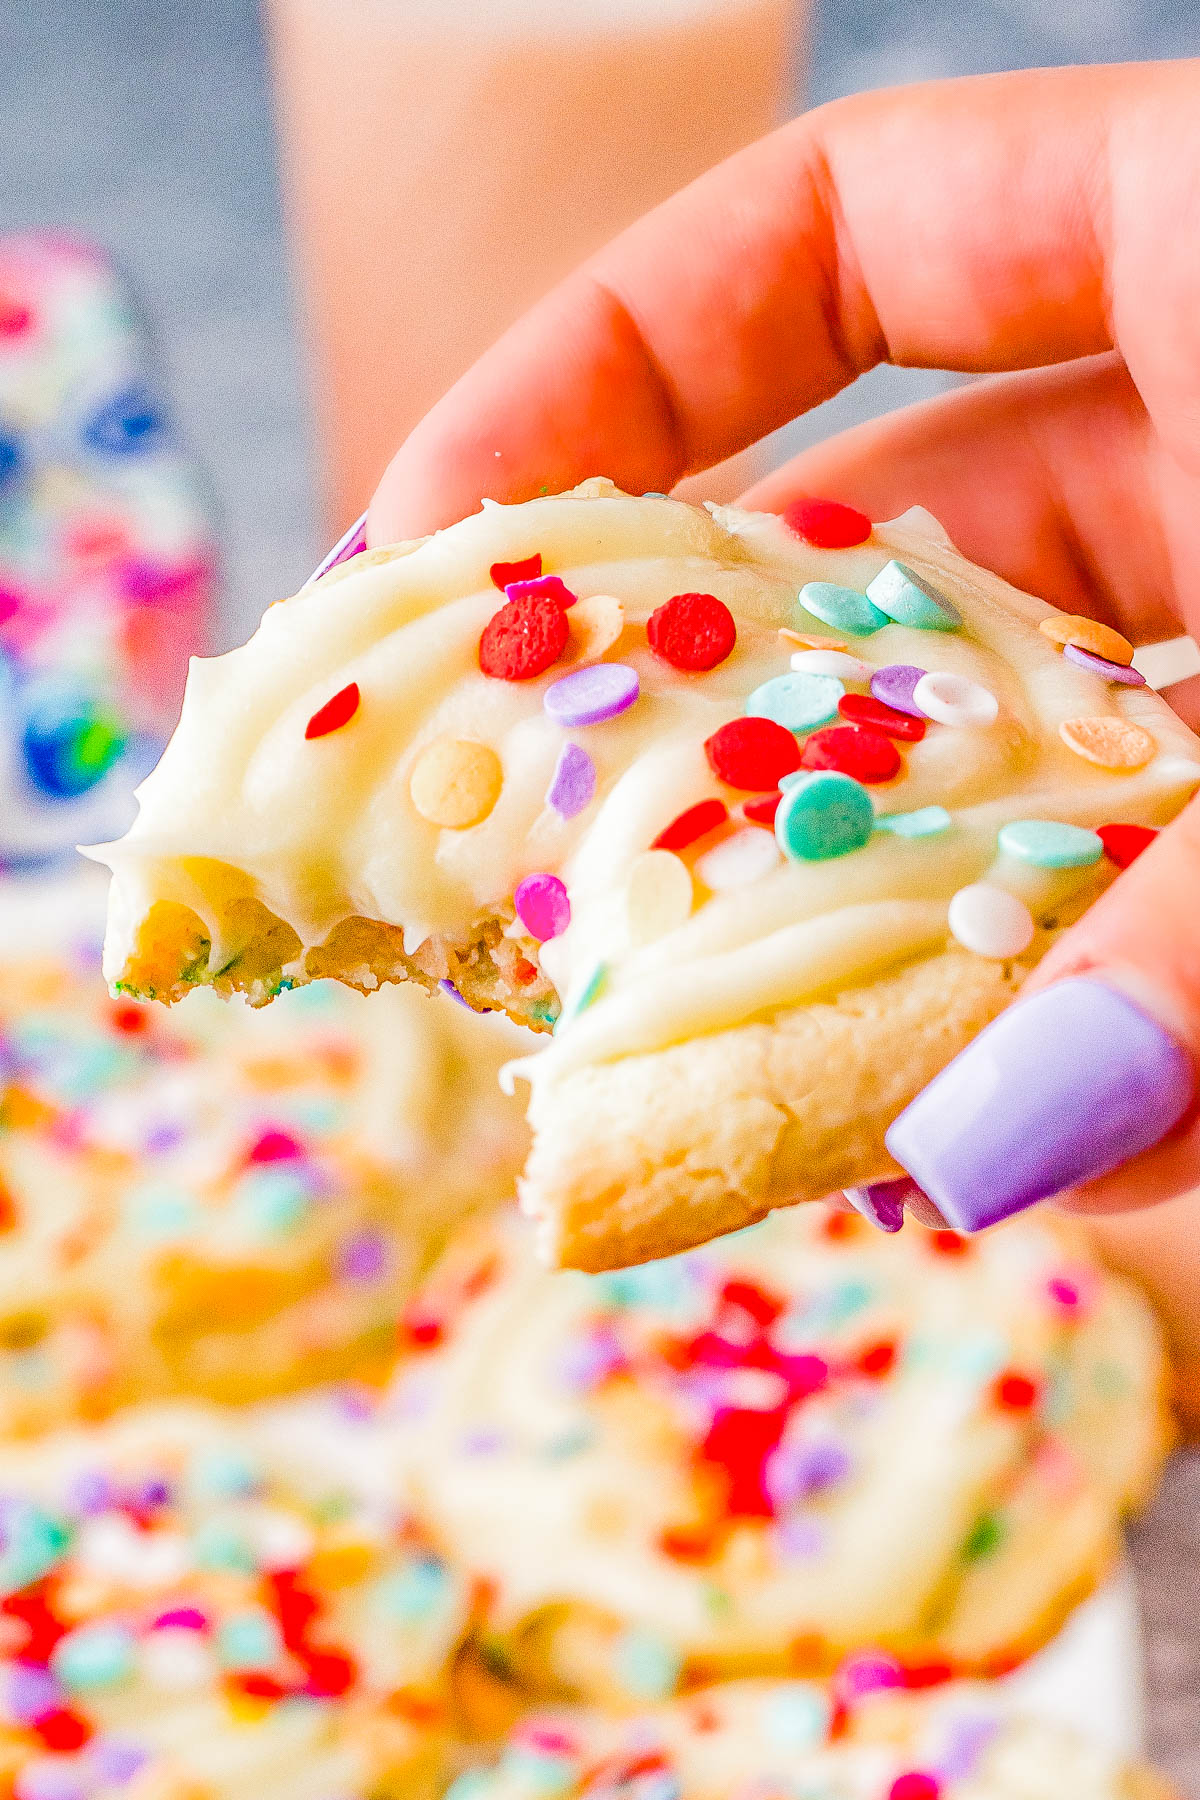 Confetti Cake Cookies (Crumbl Cookie Copycat Recipe) - Jumbo, super soft, slightly chewy cake mix cookies that are a PERFECT COPYCAT of the famous Crumbl Cookies! Loaded with rainbow and confetti sprinkles, and topped with vanilla cream cheese frosting, these are a dead ringer for the real thing! 